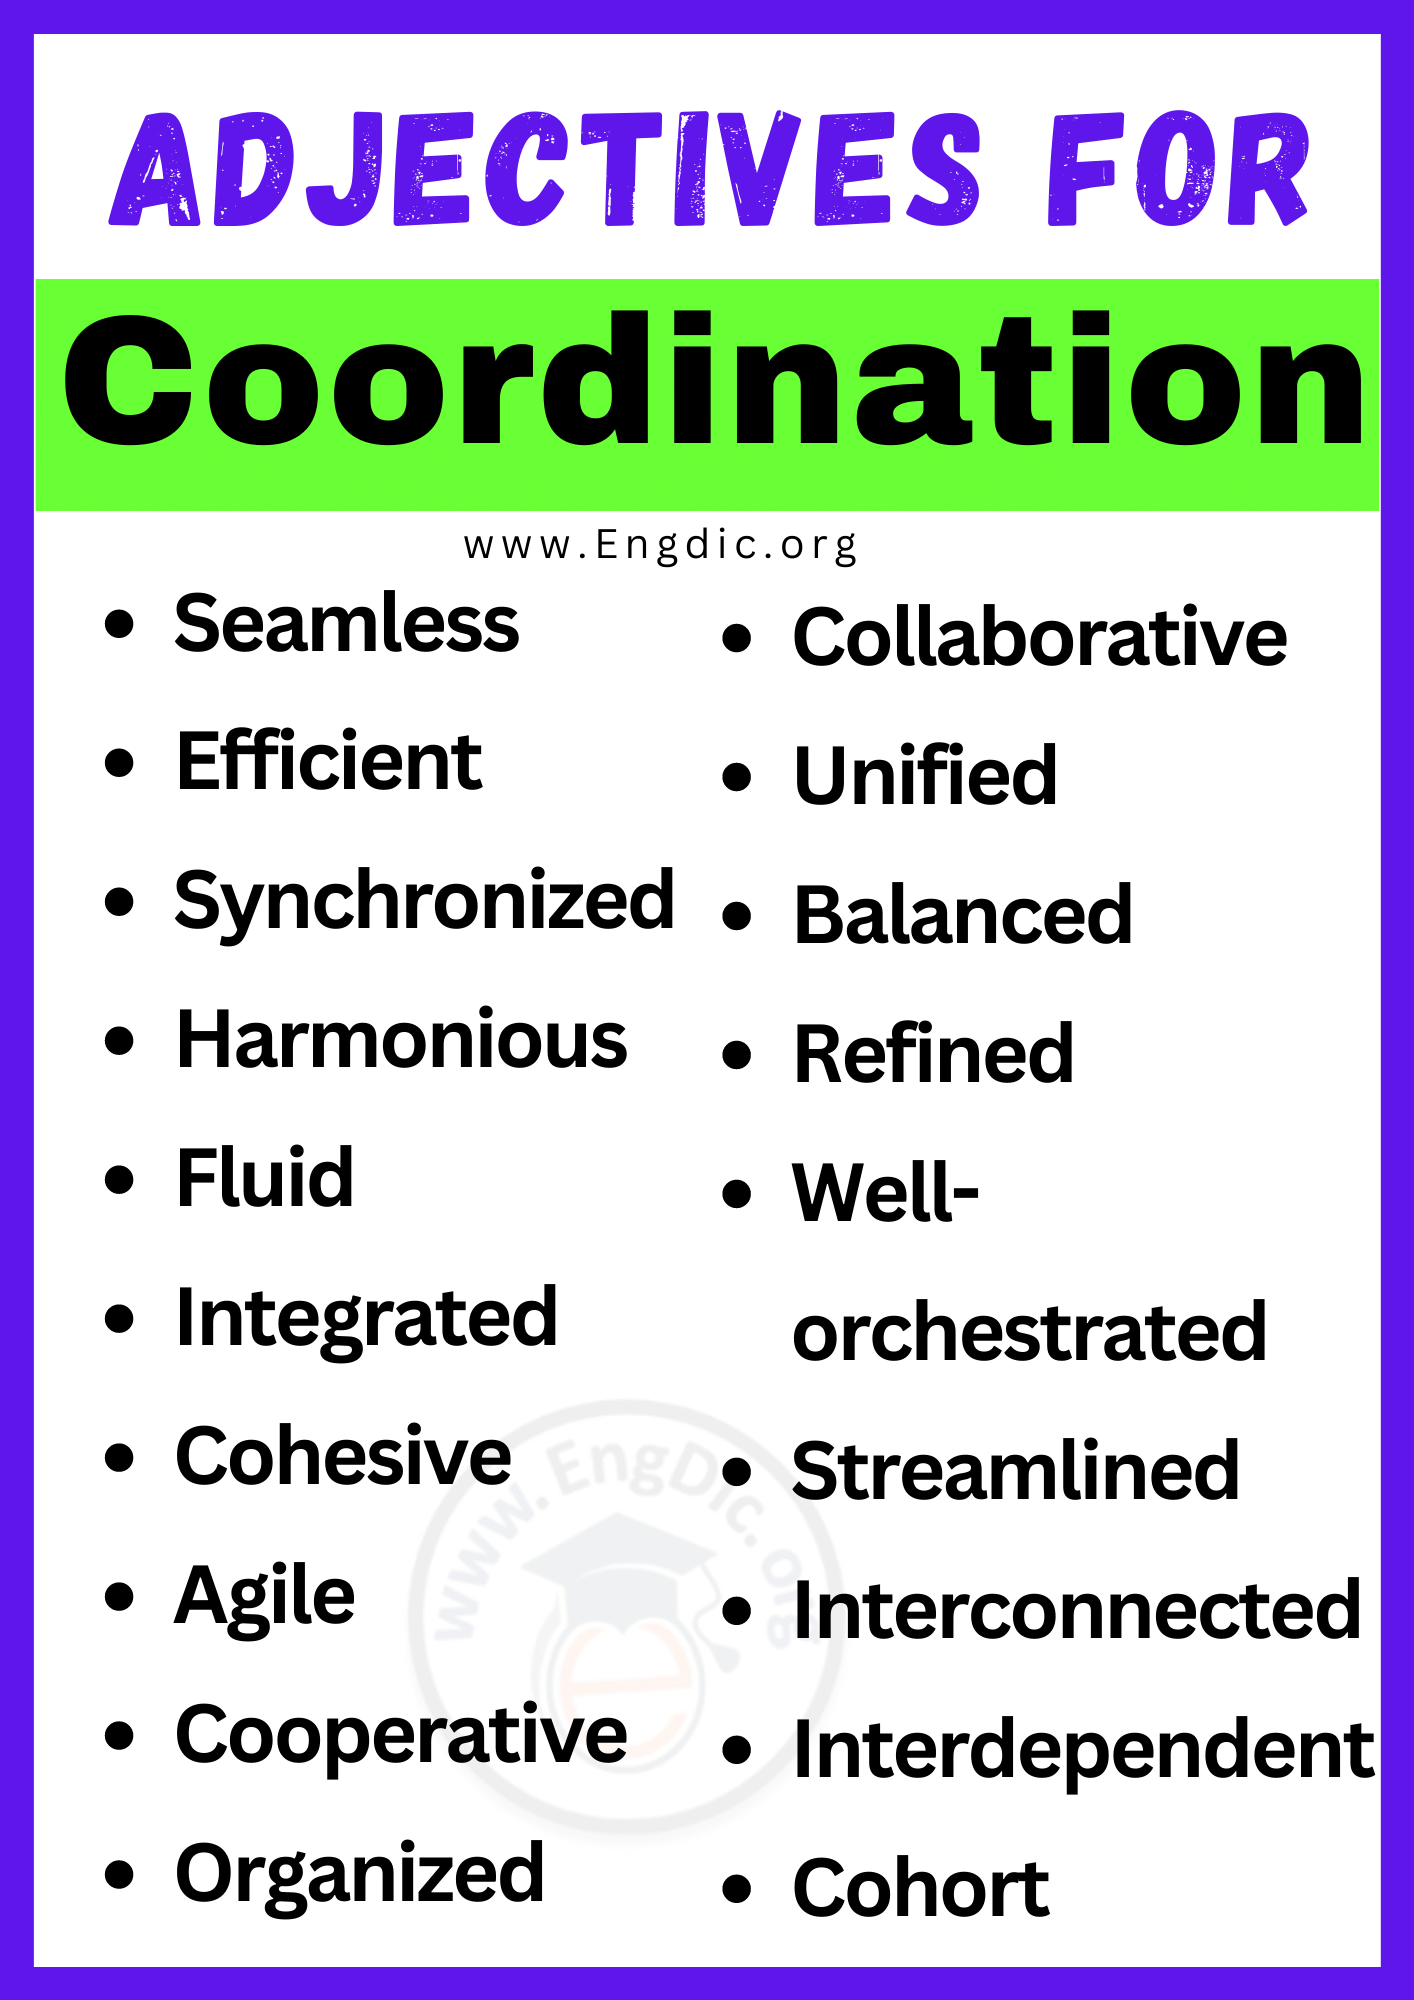 Adjectives for Coordination